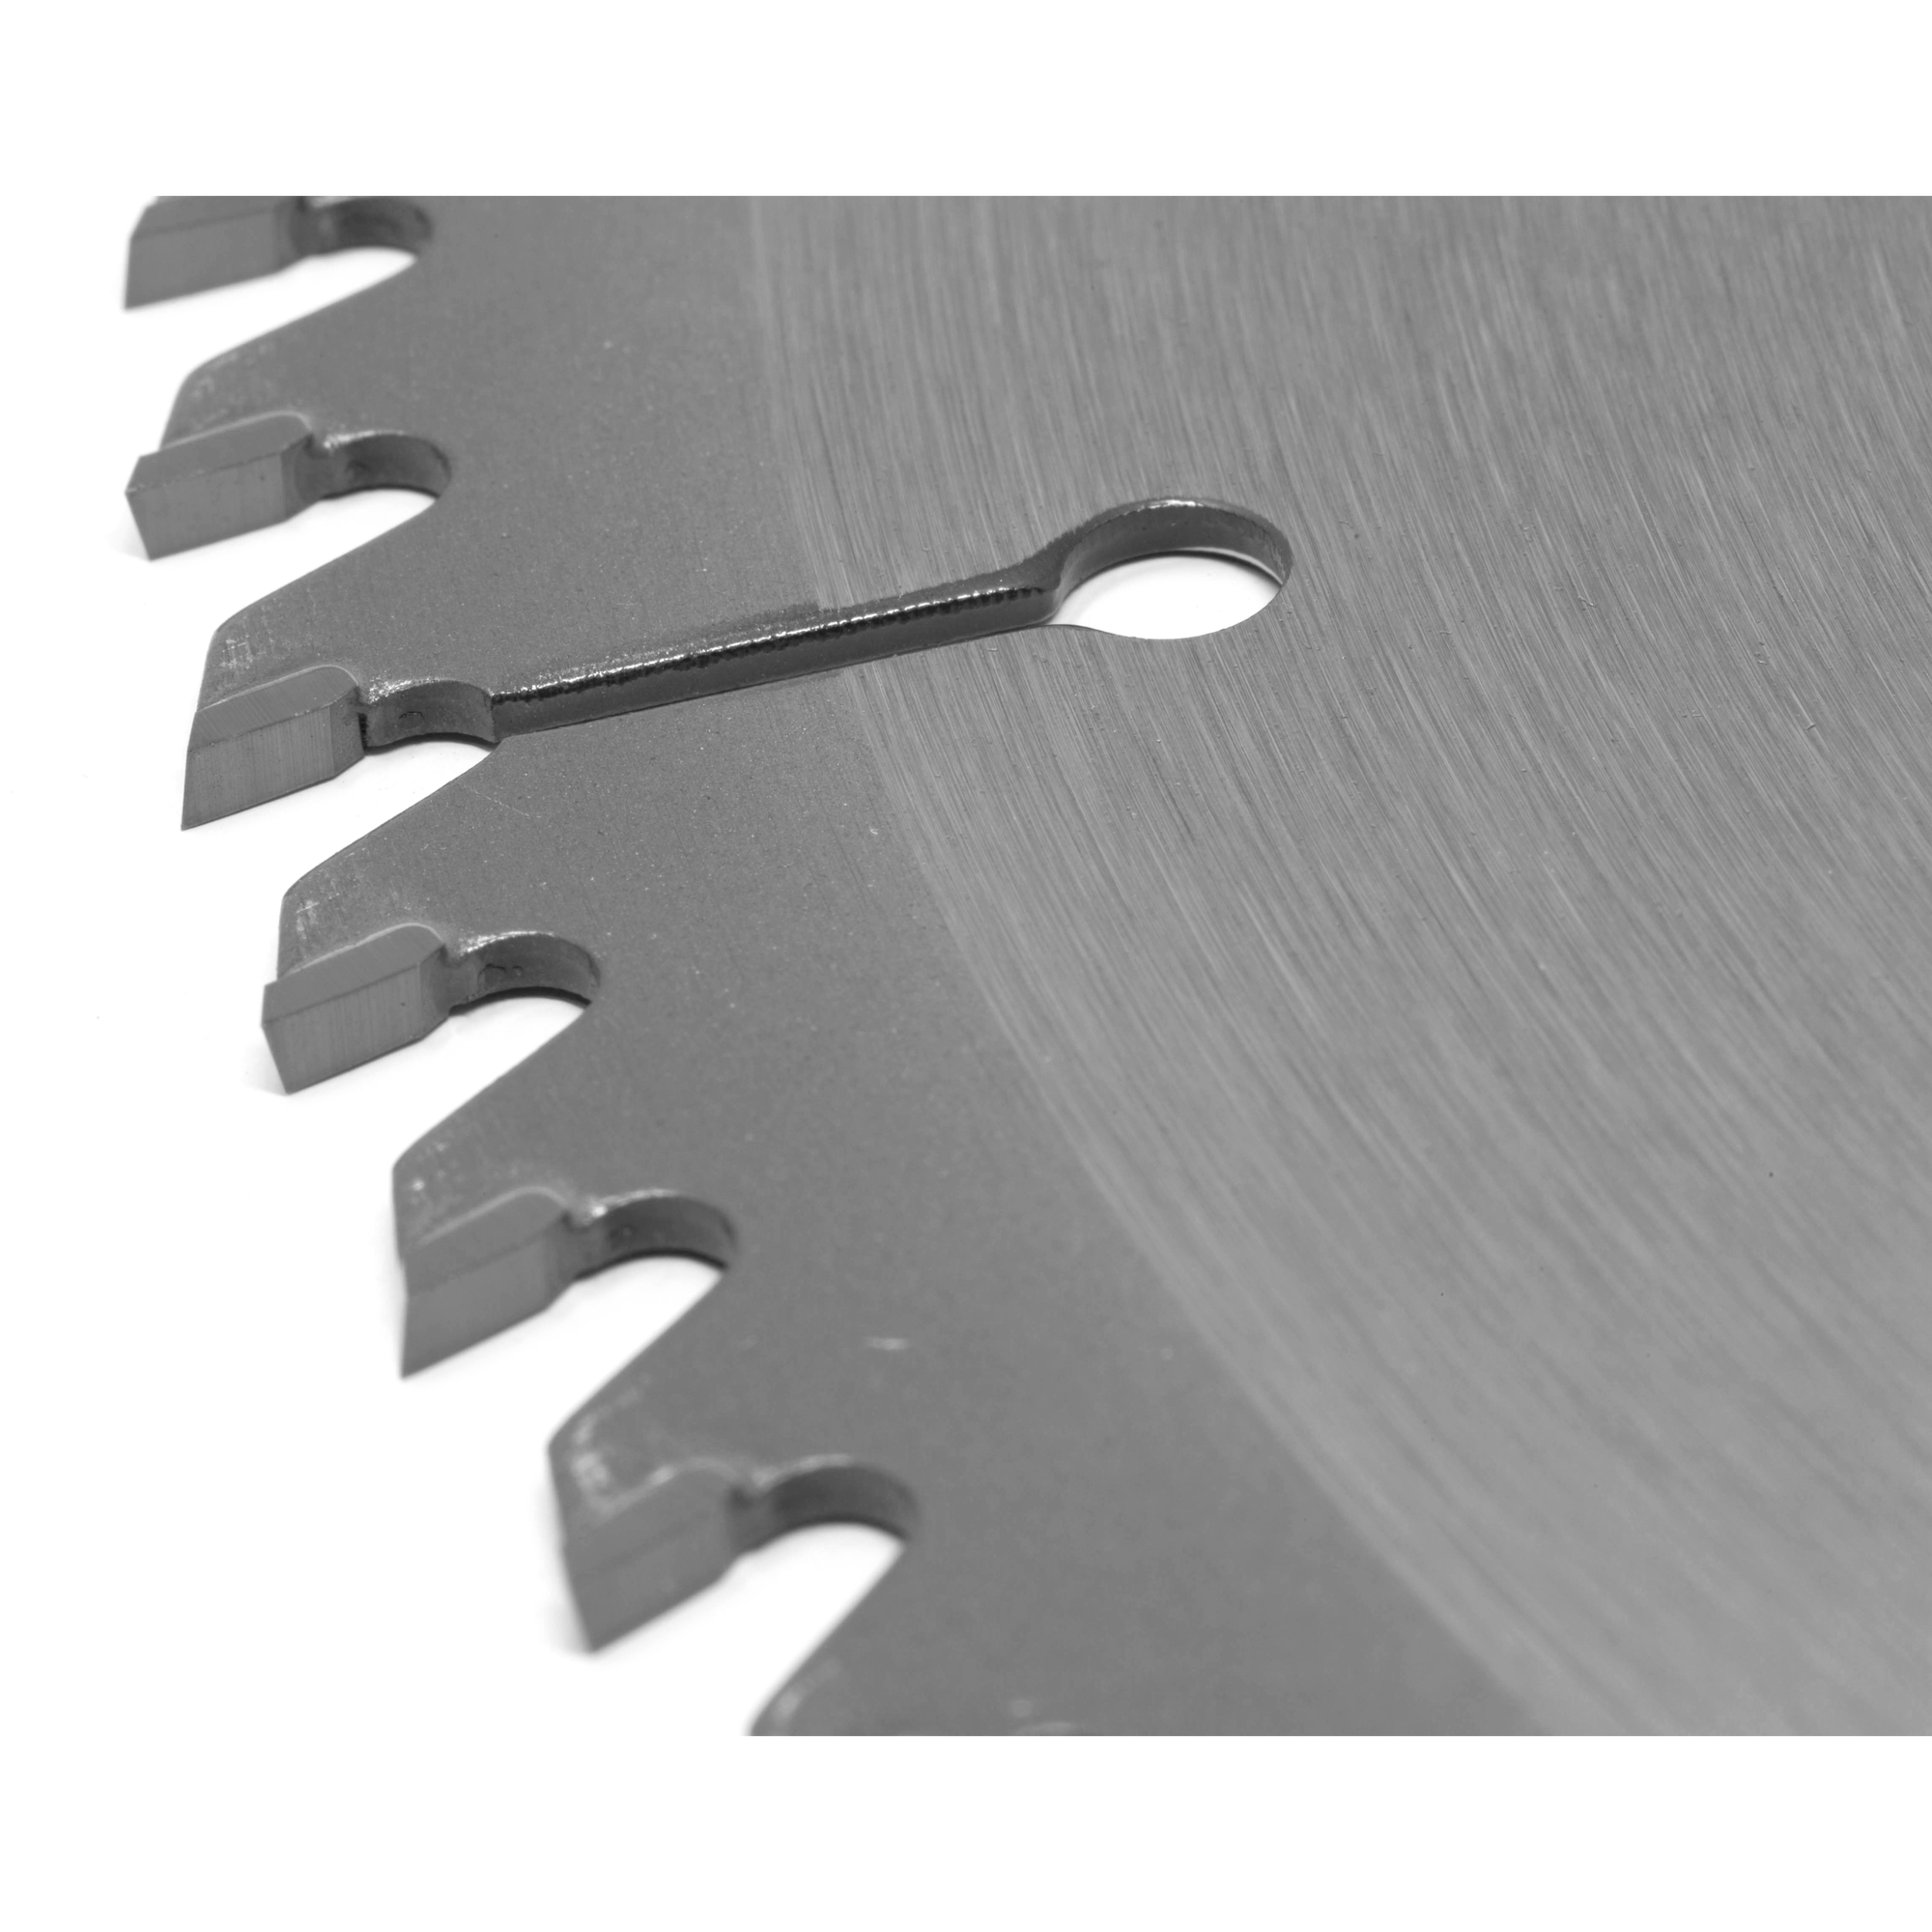 WEN, 12in. 80-Tooth Fine-Finish Woodworking Saw Blade, Blade Diameter 12  in, Included (qty.) 1, Model# BL1280 Northern Tool